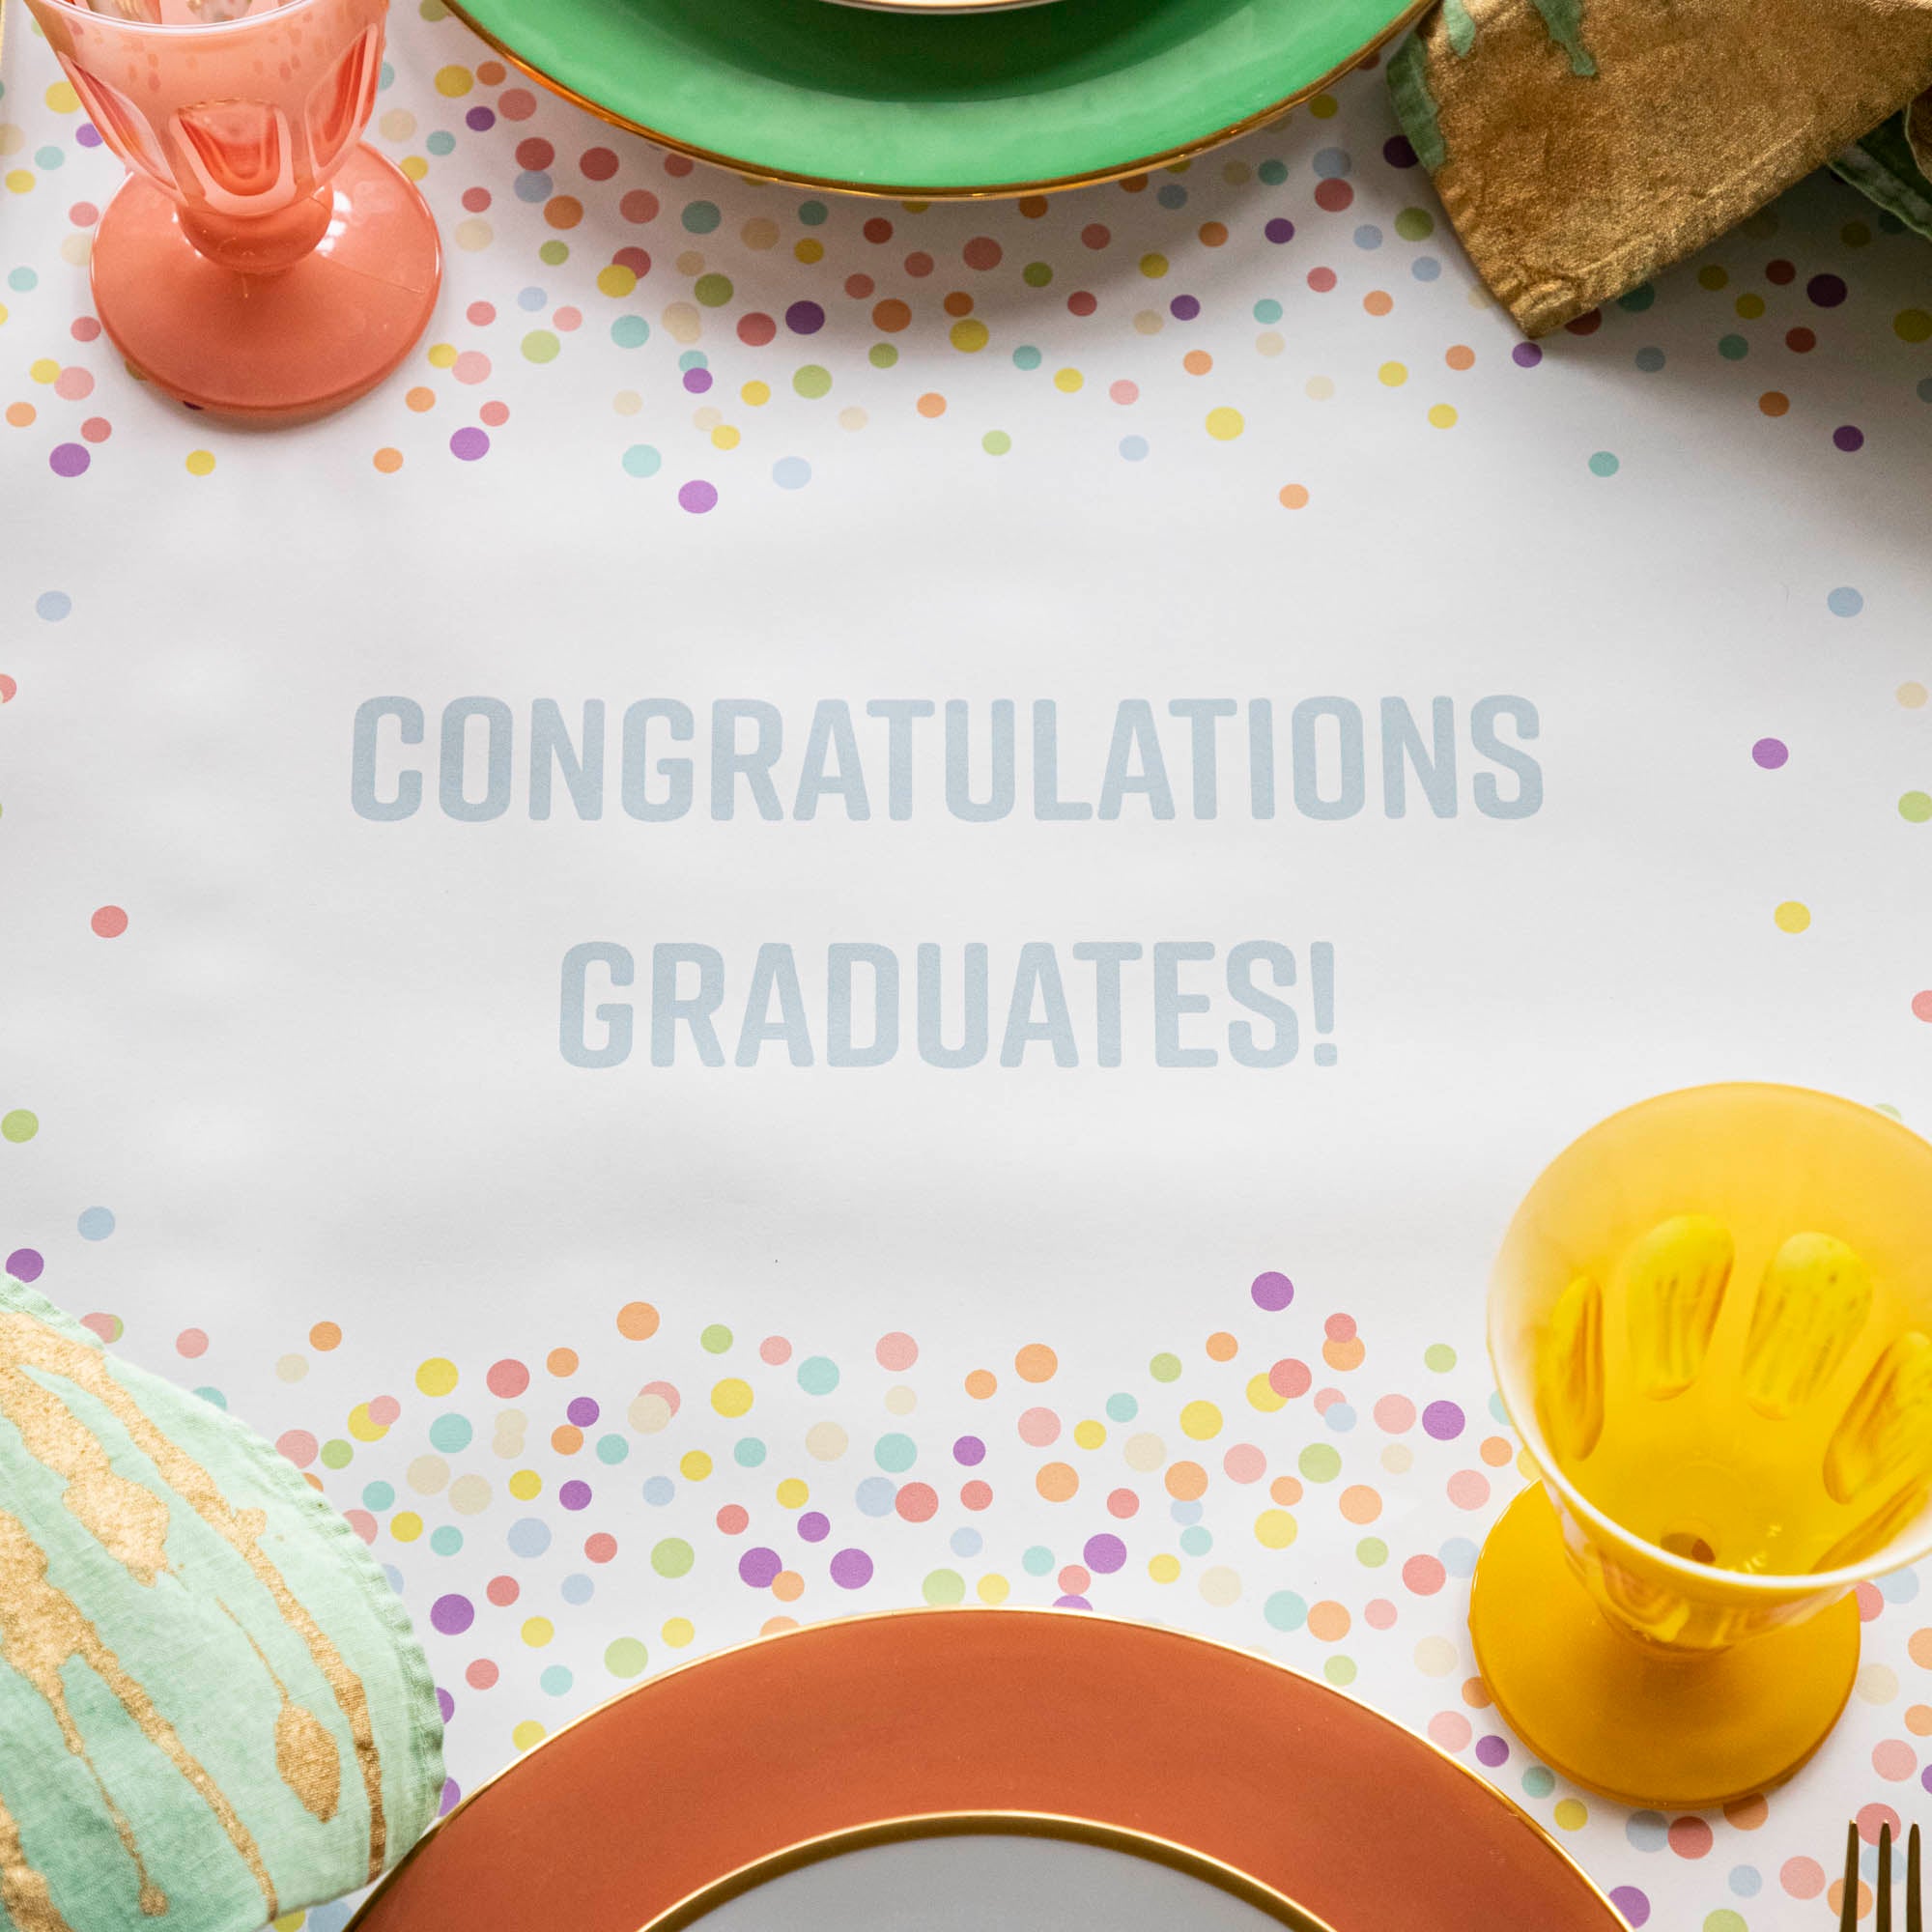 Close-up of the Confetti Sprinkles Personalized Runner under a festive table setting, with &quot;CONGRATULATIONS GRADUATES!&quot; printed in light blue.